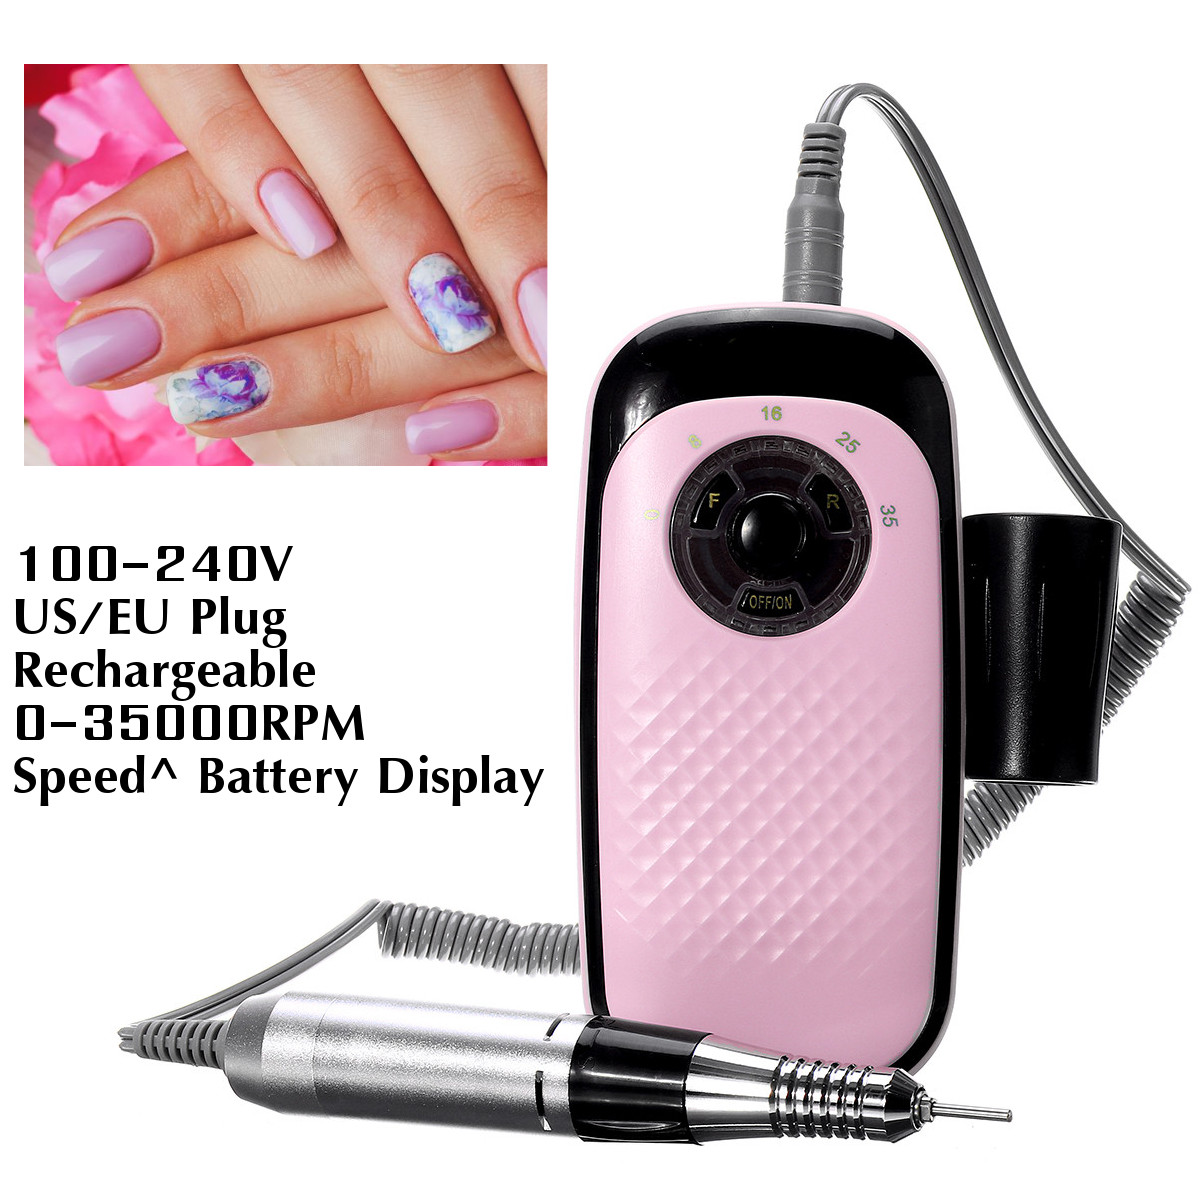 35000RPM-Rechargeable-Electric-Nail-Drill-Machine-Pen-Portable-Manicure-Pedicure-Tool-1667422-3